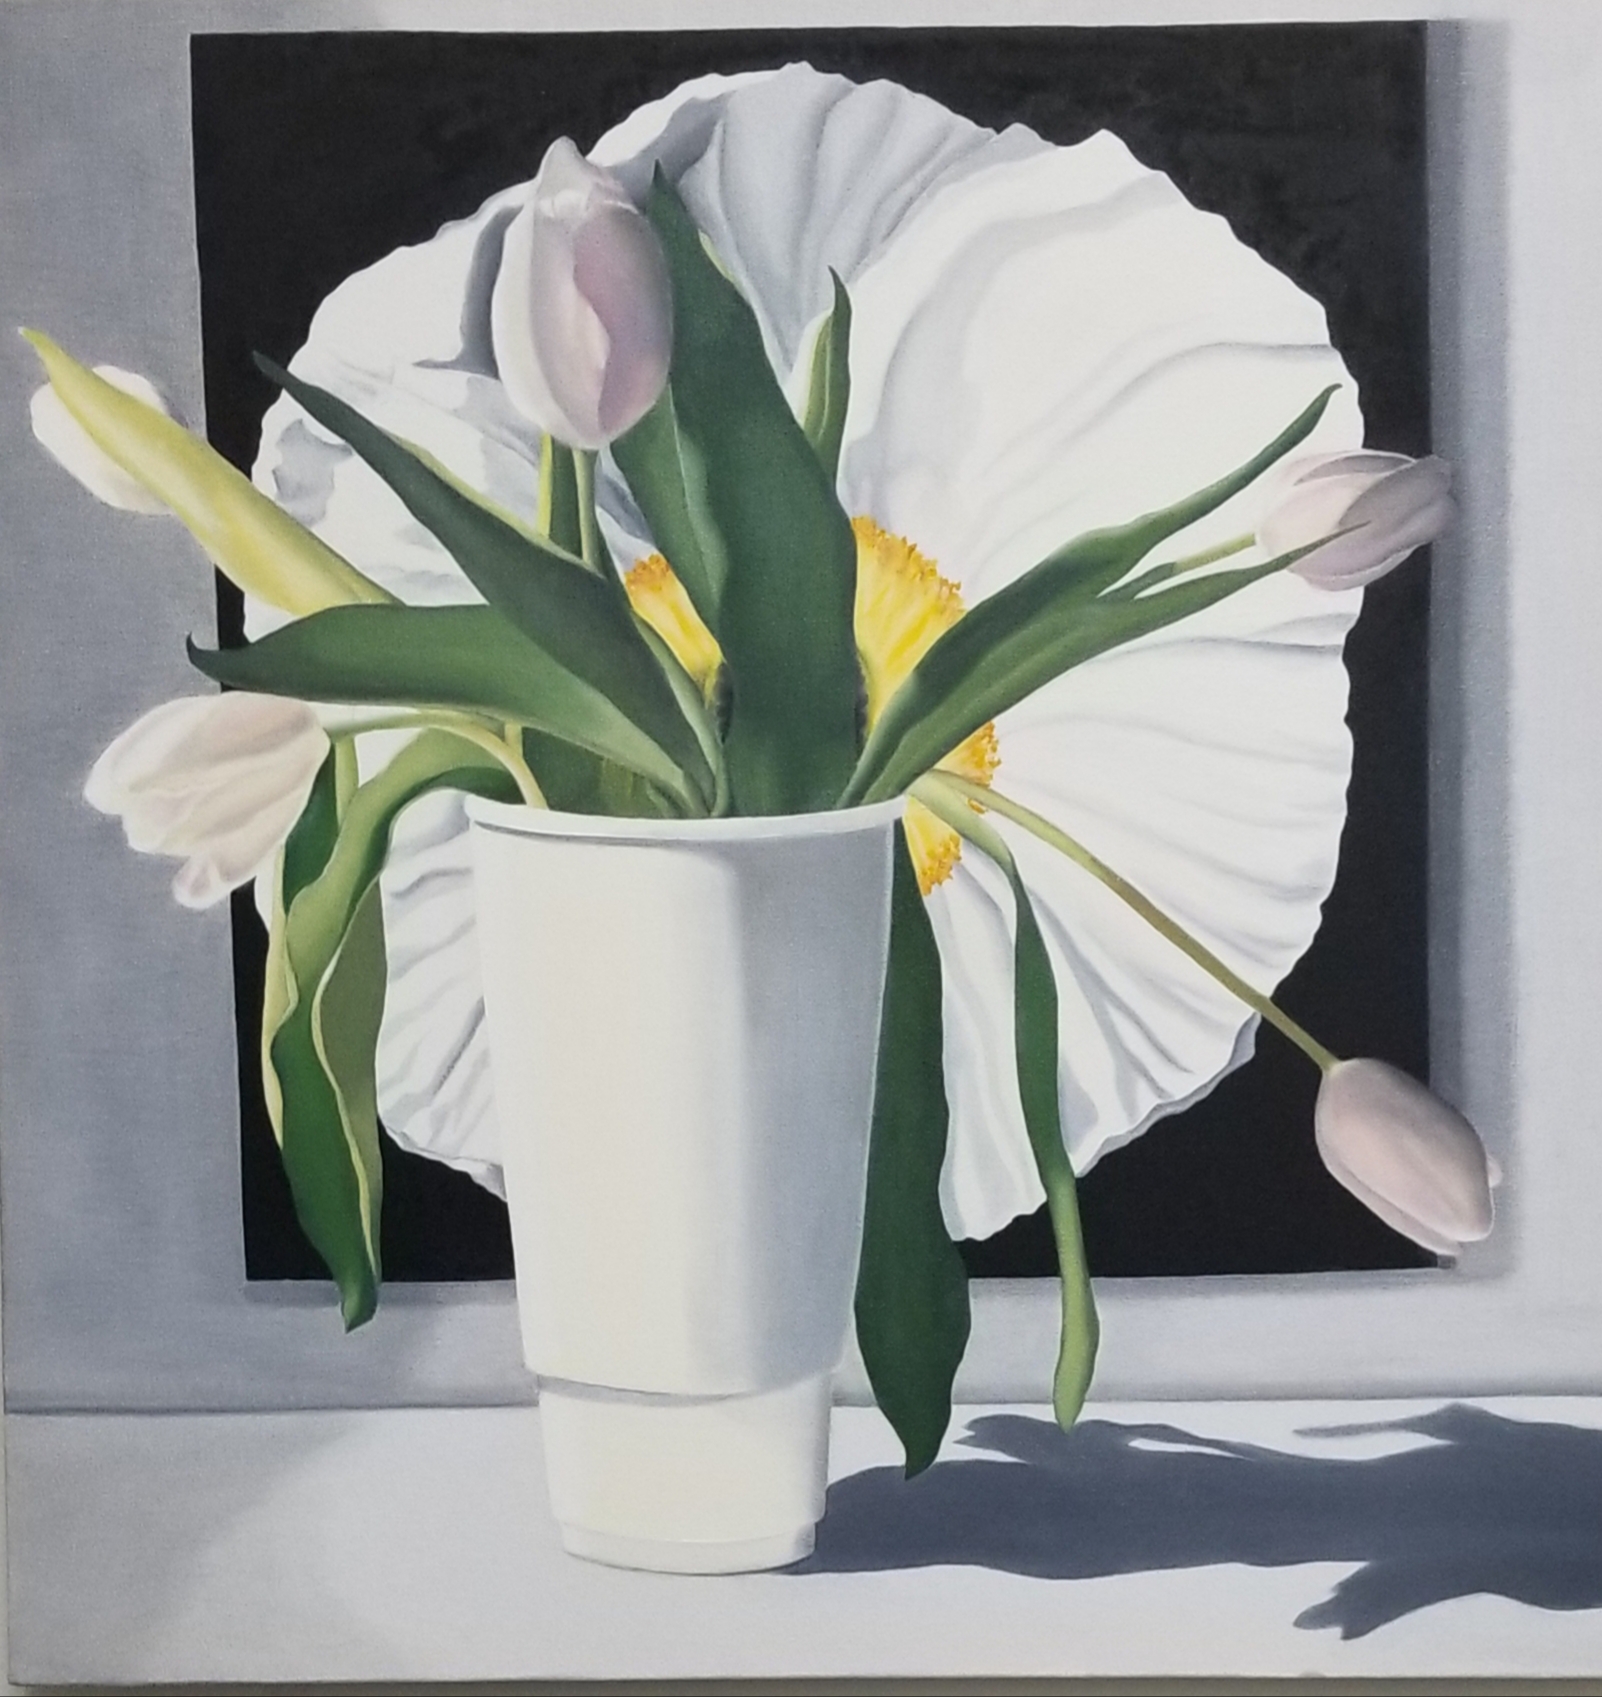 Susan Carlo "Wildflower," oil on canvas, 36" x 36" will be on view at 17 Women